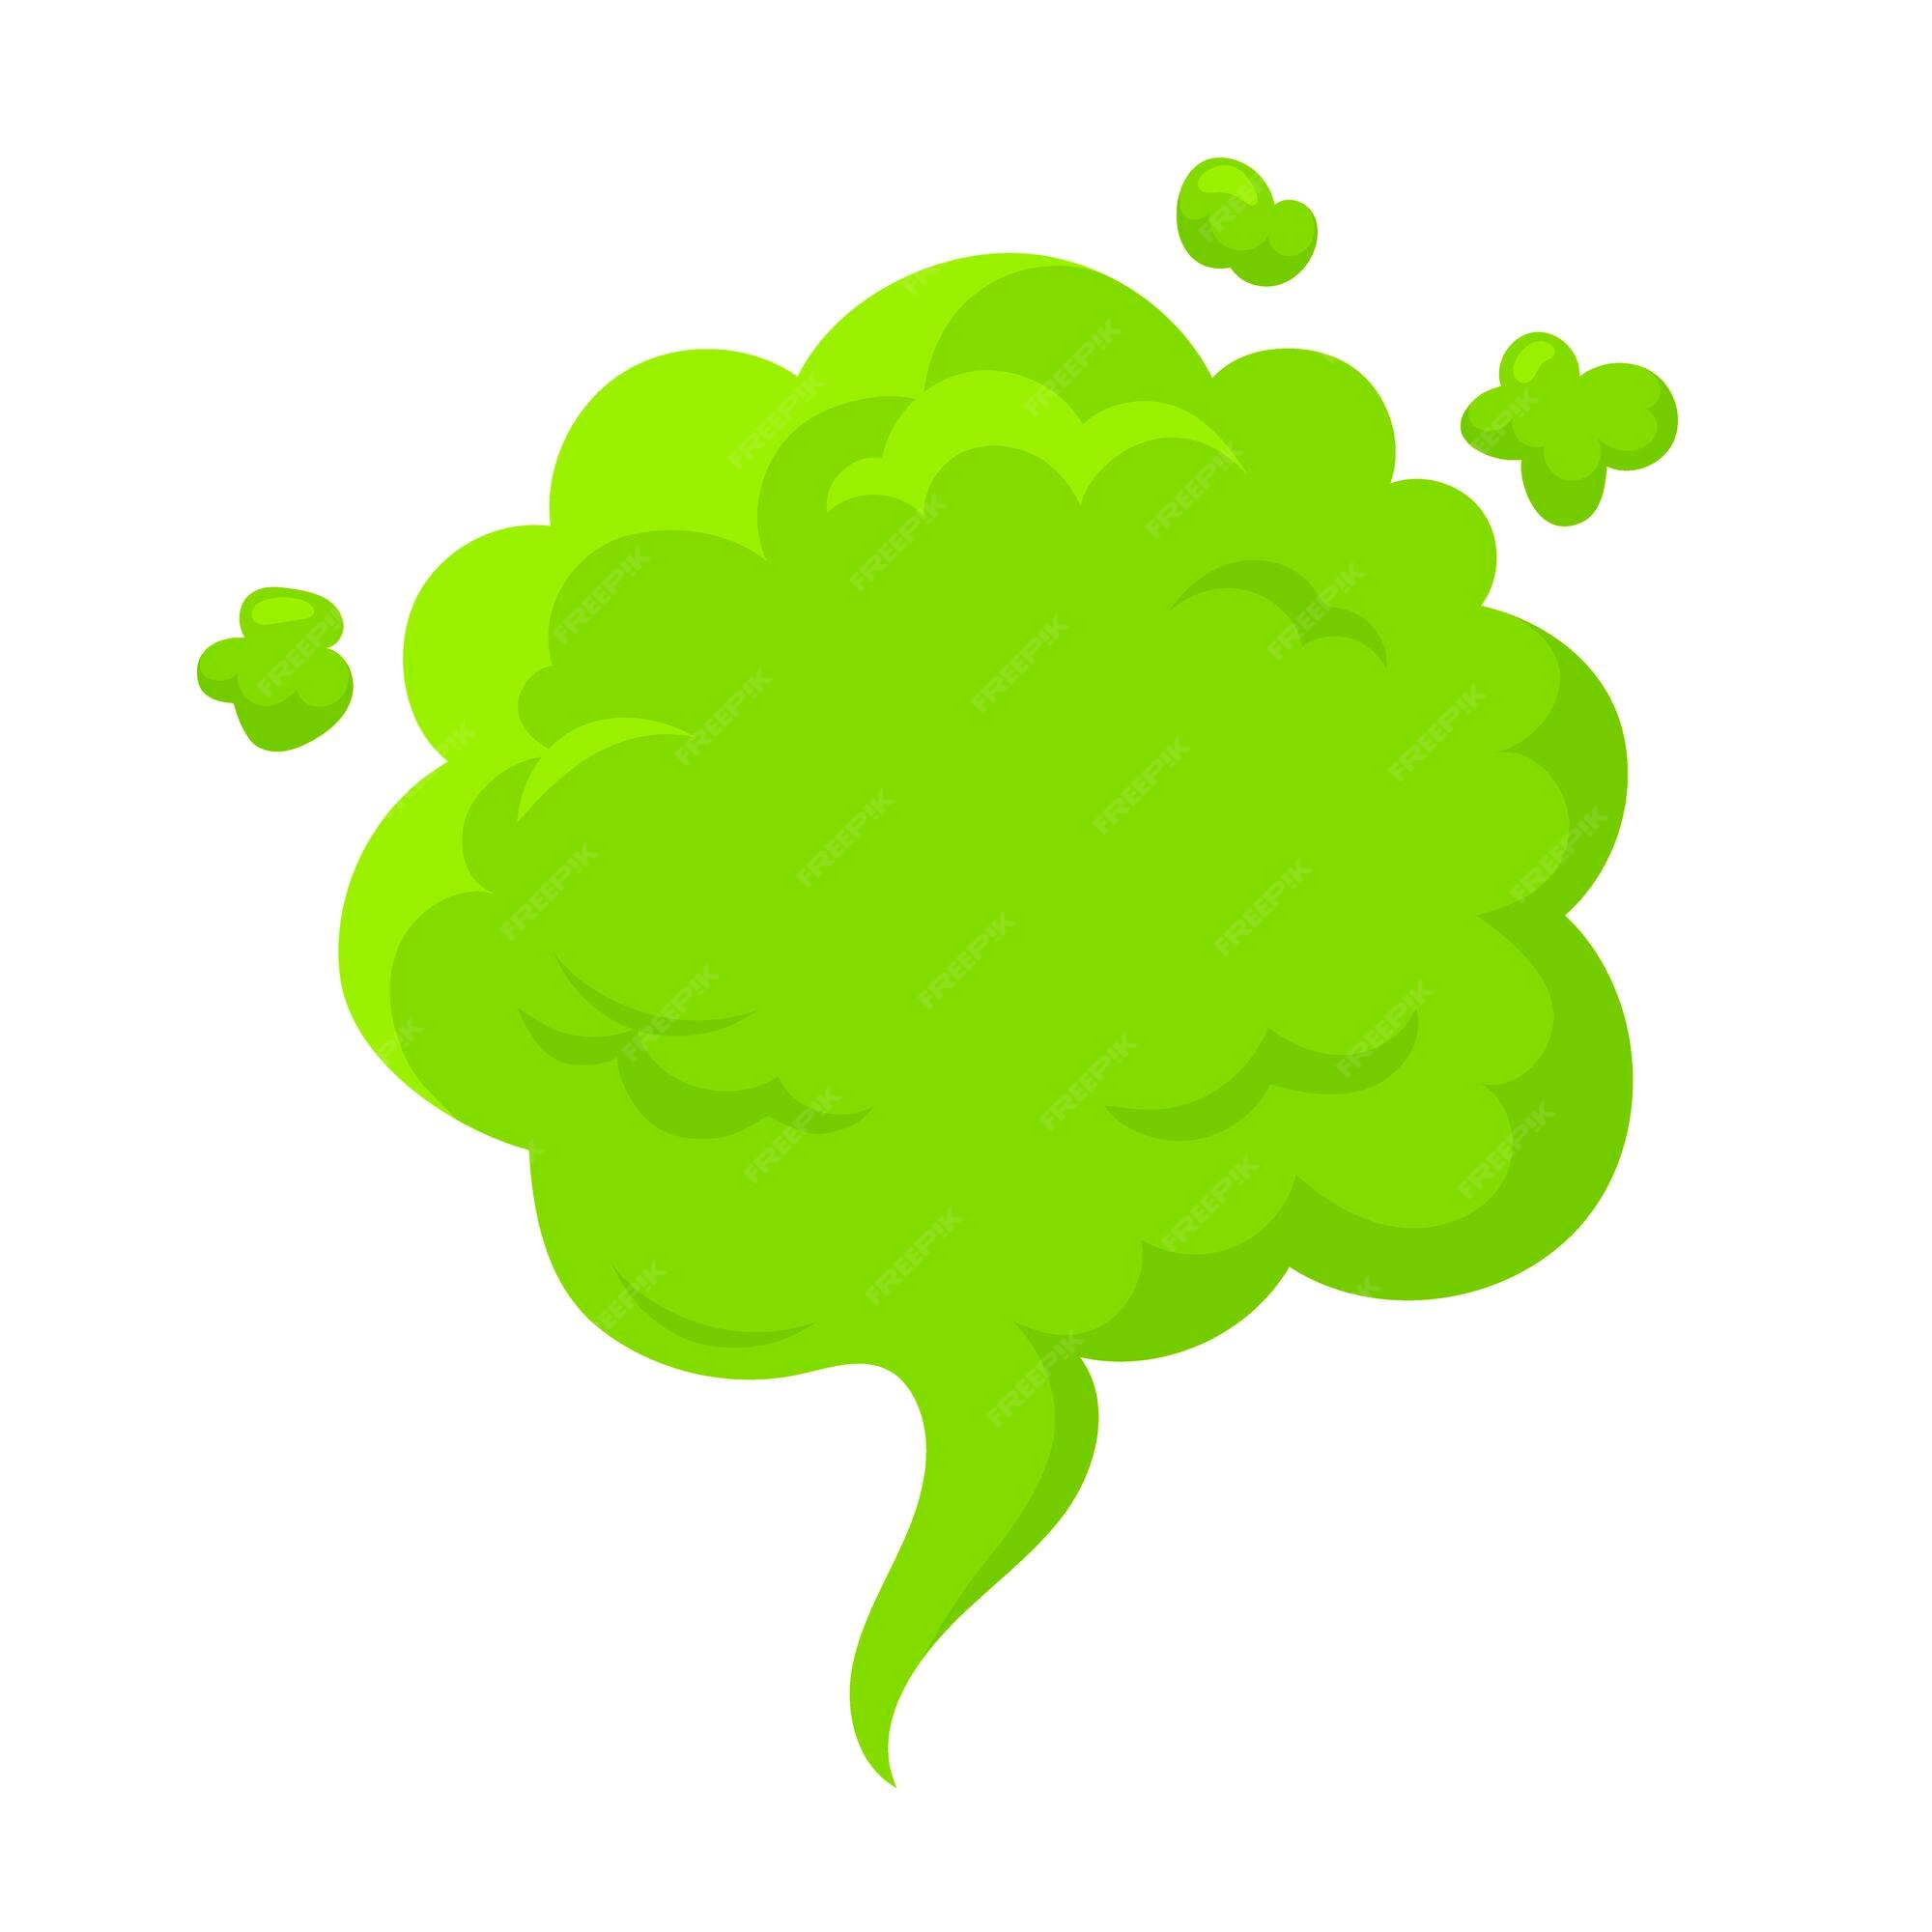 Premium Vector | Bad smell fart cloud green smelly toxic cloud in cartoon  style comic smoke illustration of stinky odor such as fart cigarette breath  rotten food or garbage chemical poison fume